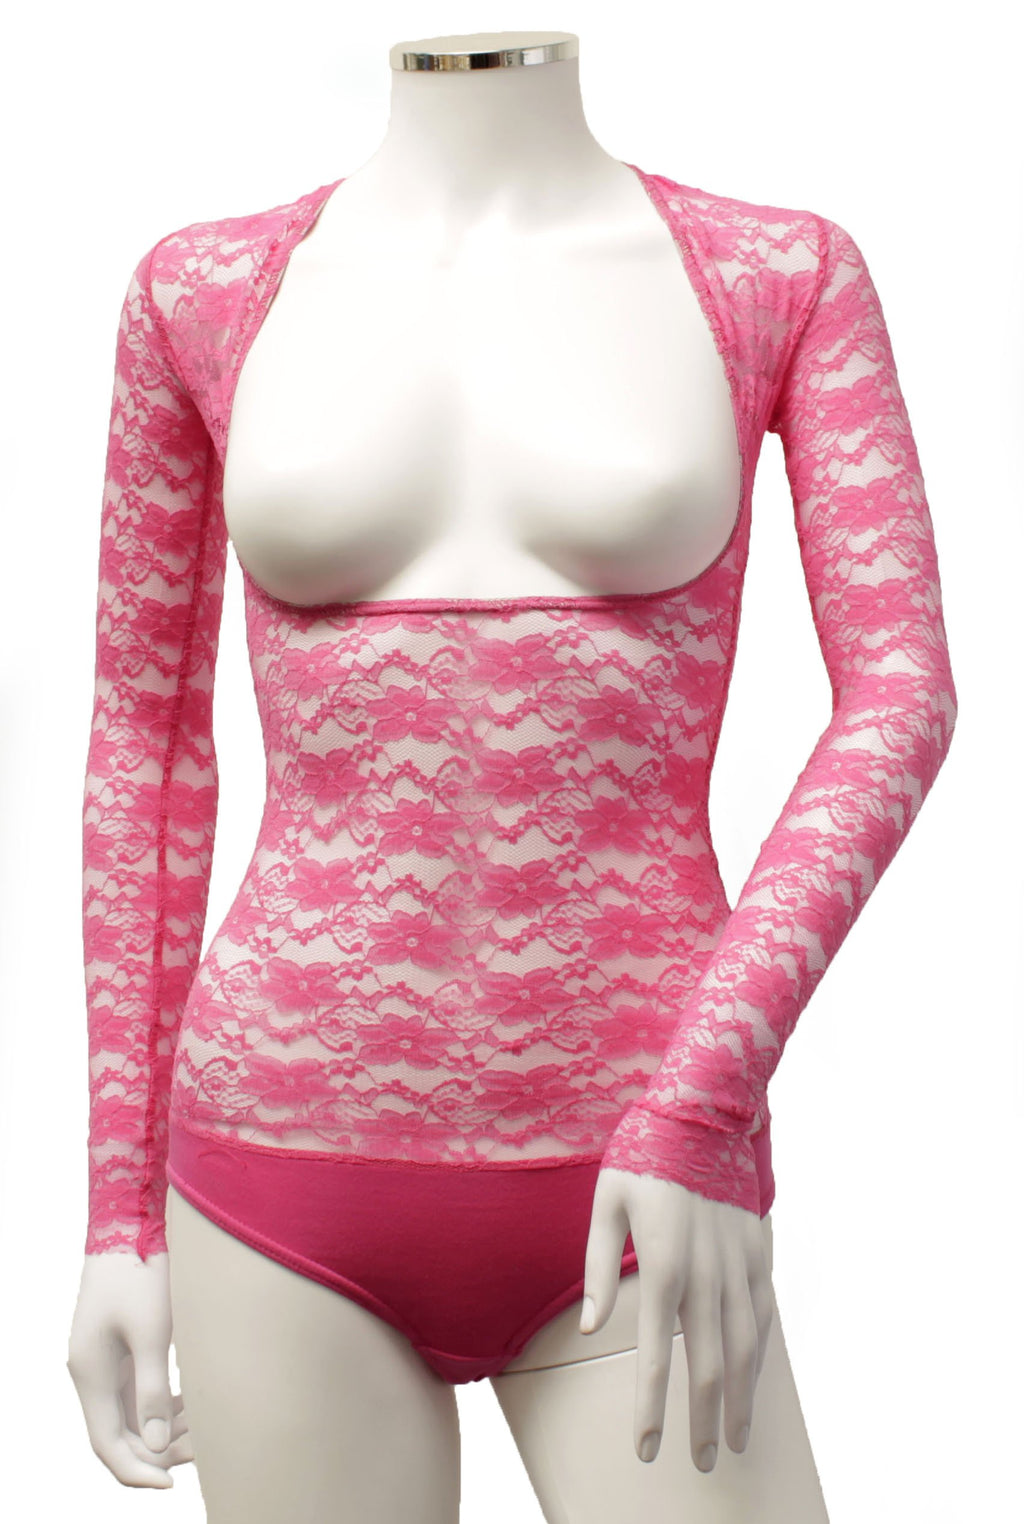 Underbust with Sleeves - Pink Lace